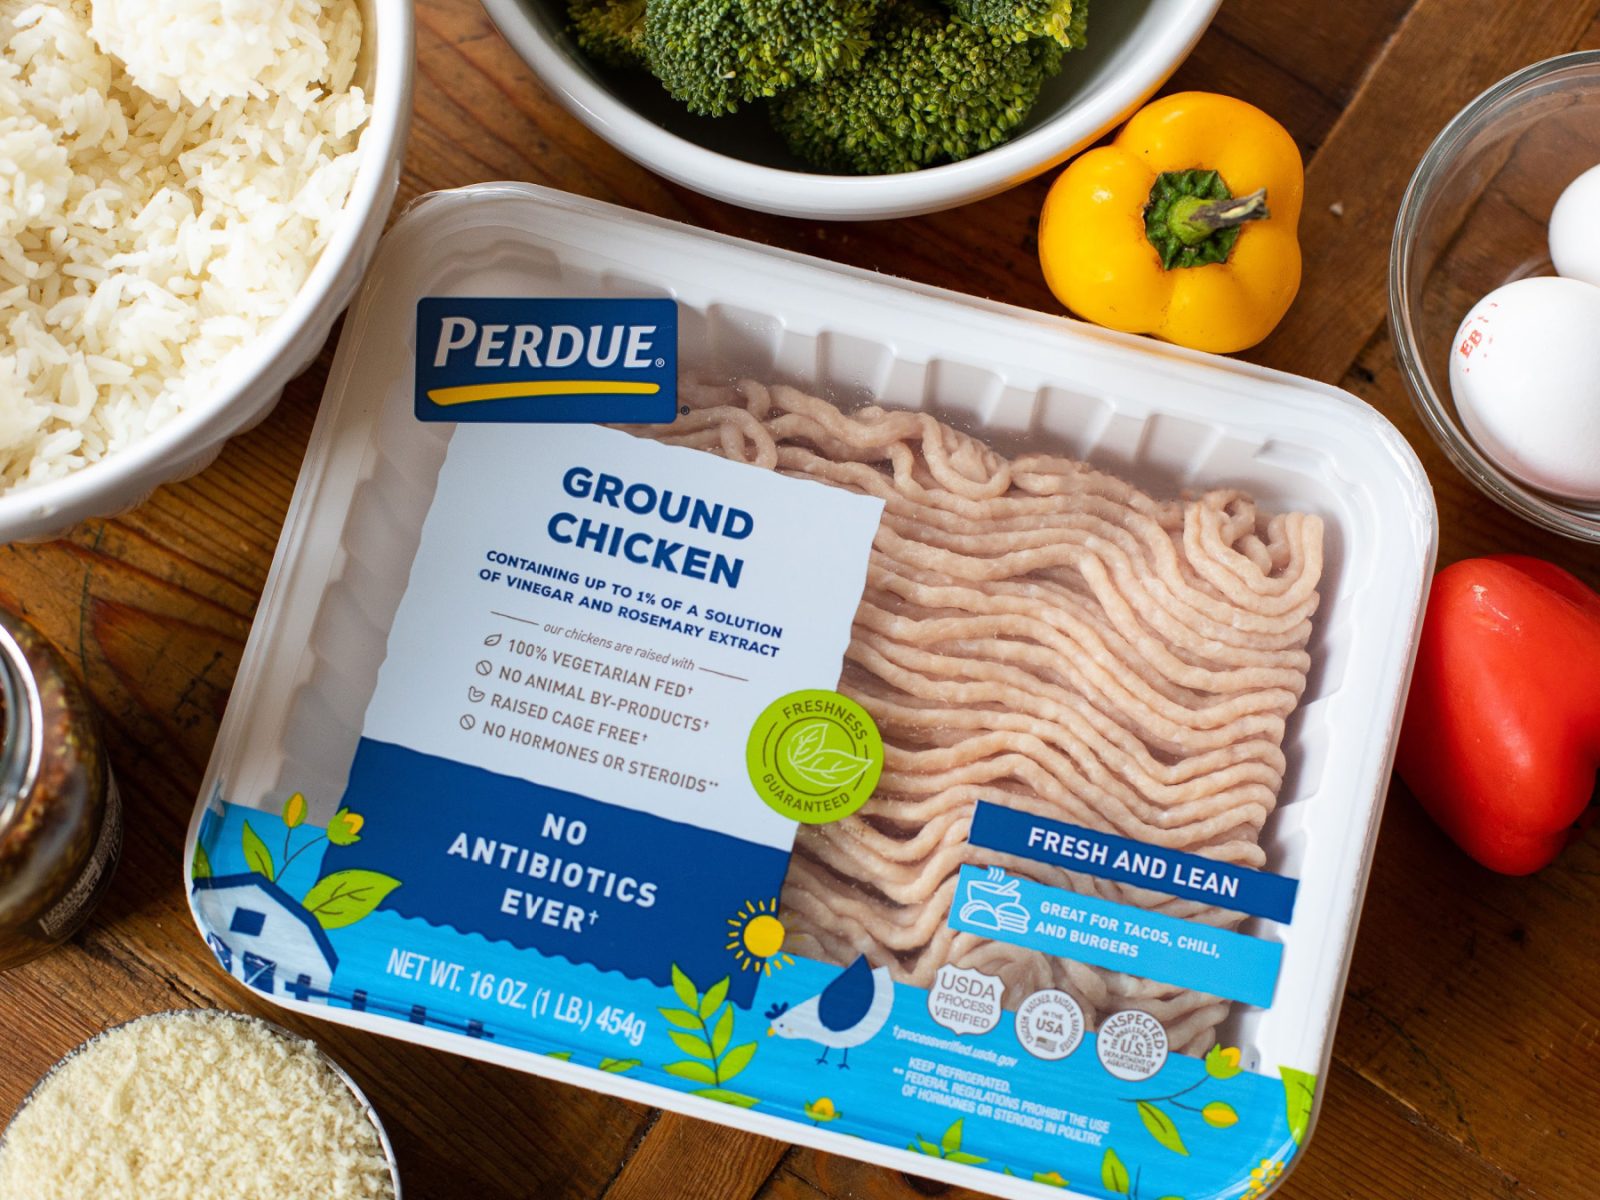 Get Perdue Ground Chicken For Just $3.50 Per Package At Publix